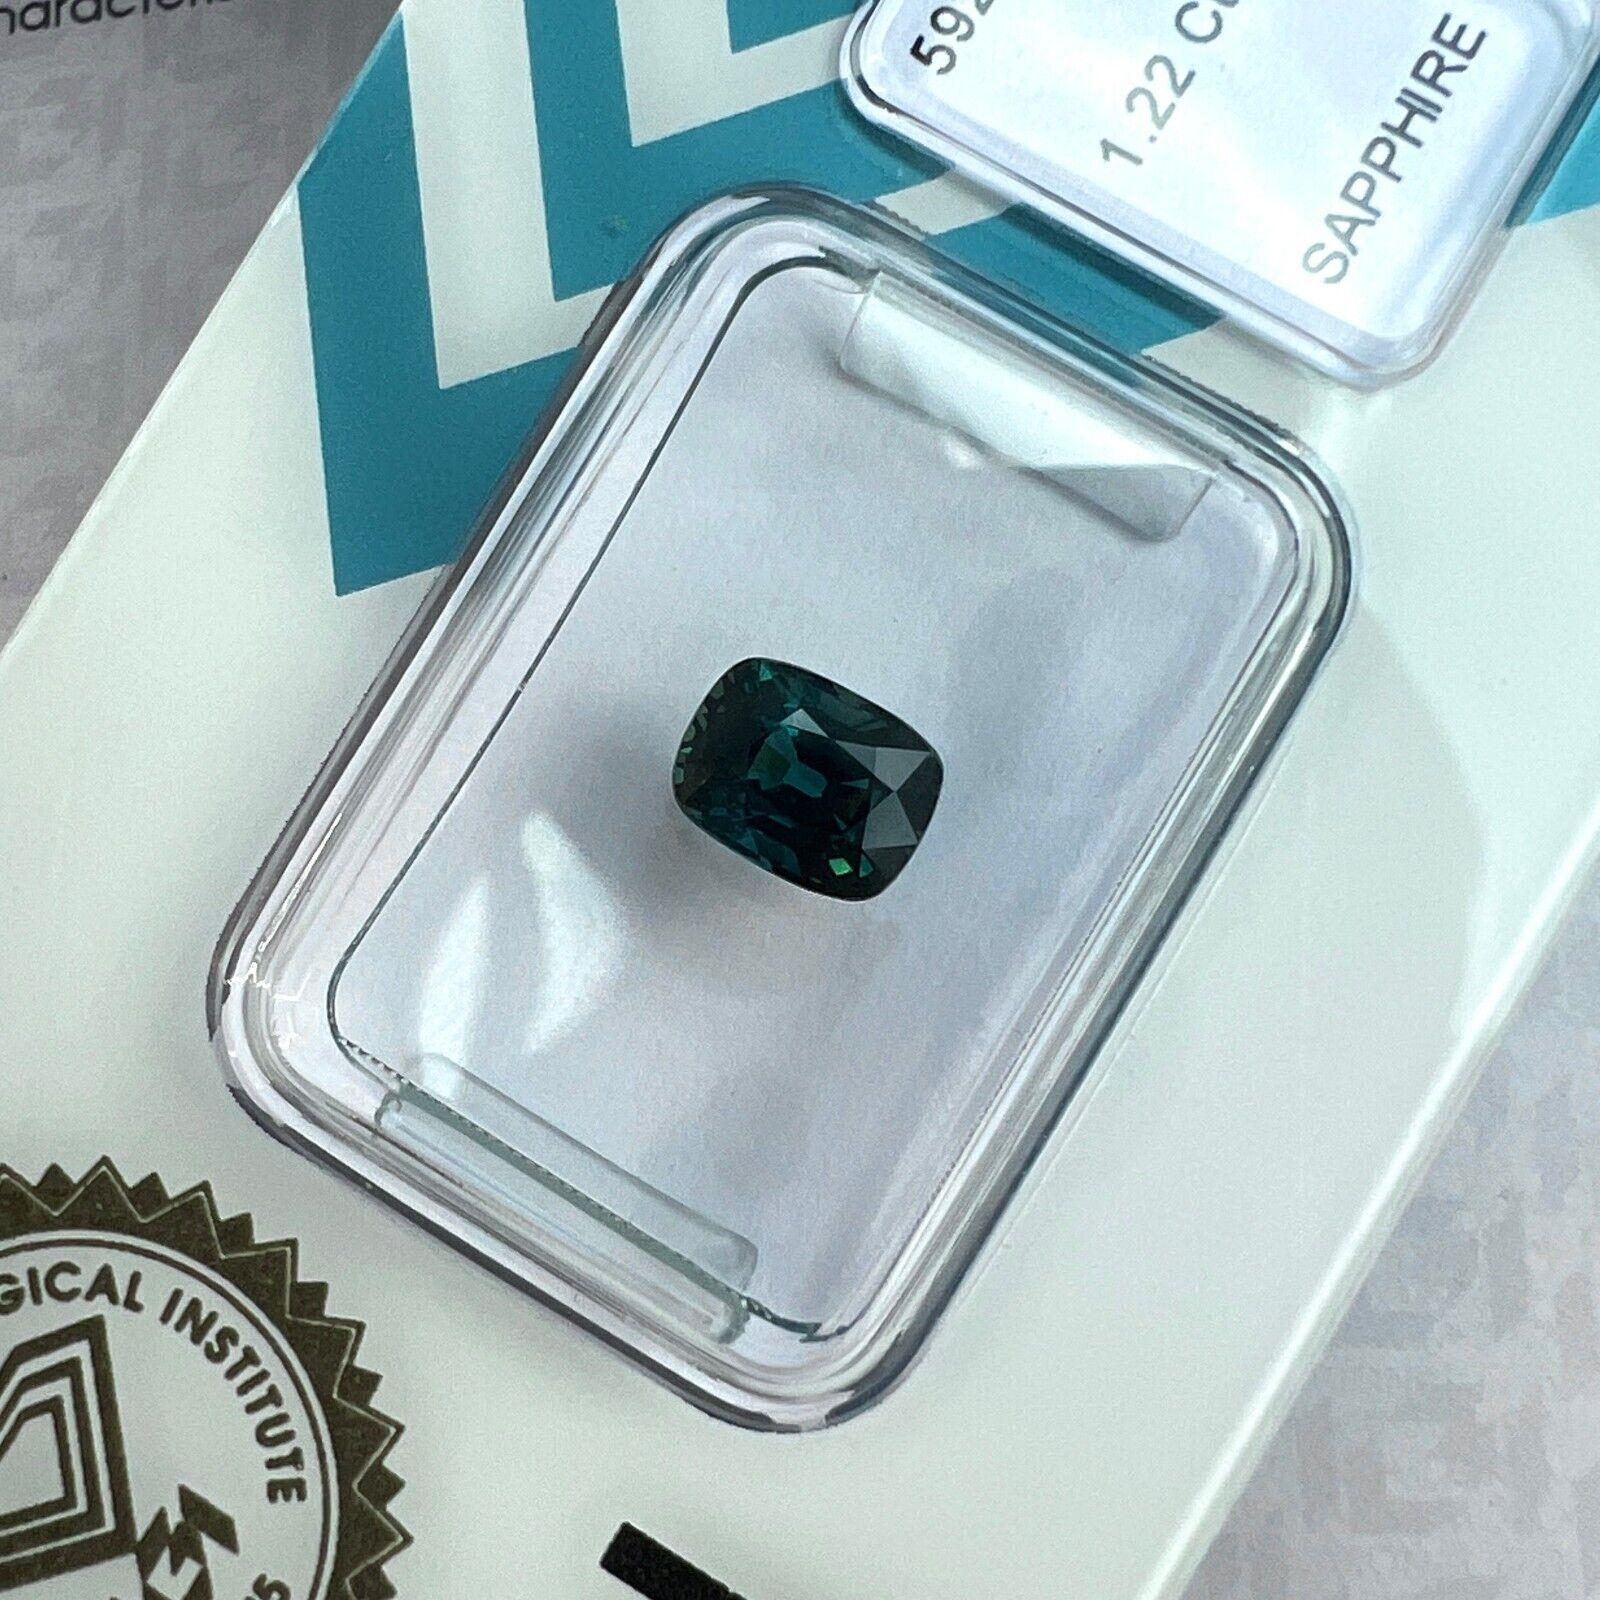 1.22ct Natural Deep Green Blue Teal Sapphire Unheated Cushion Cut IGI Certified

Fine Natural Deep Green Blue ‘Teal’ Untreated Sapphire In IGI Blister.
1.22 Carat with an excellent cushion cut and excellent clarity. VS.
Fully certified and sealed by